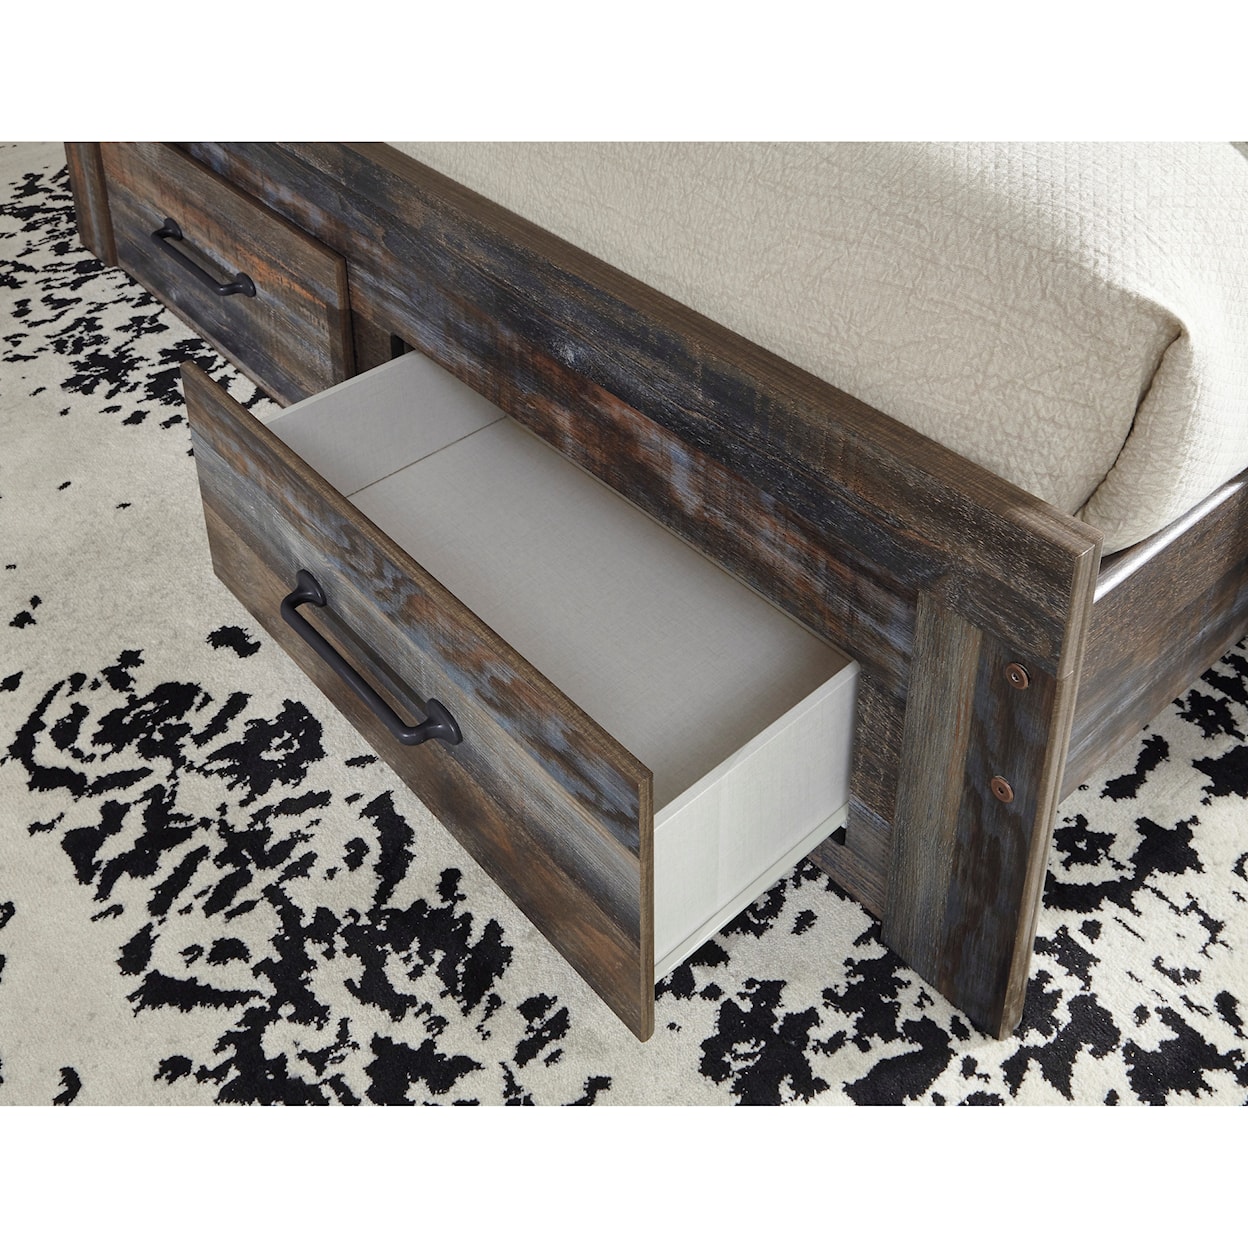 Signature Design by Ashley Baleigh King Bookcase Bed with Footboard Storage